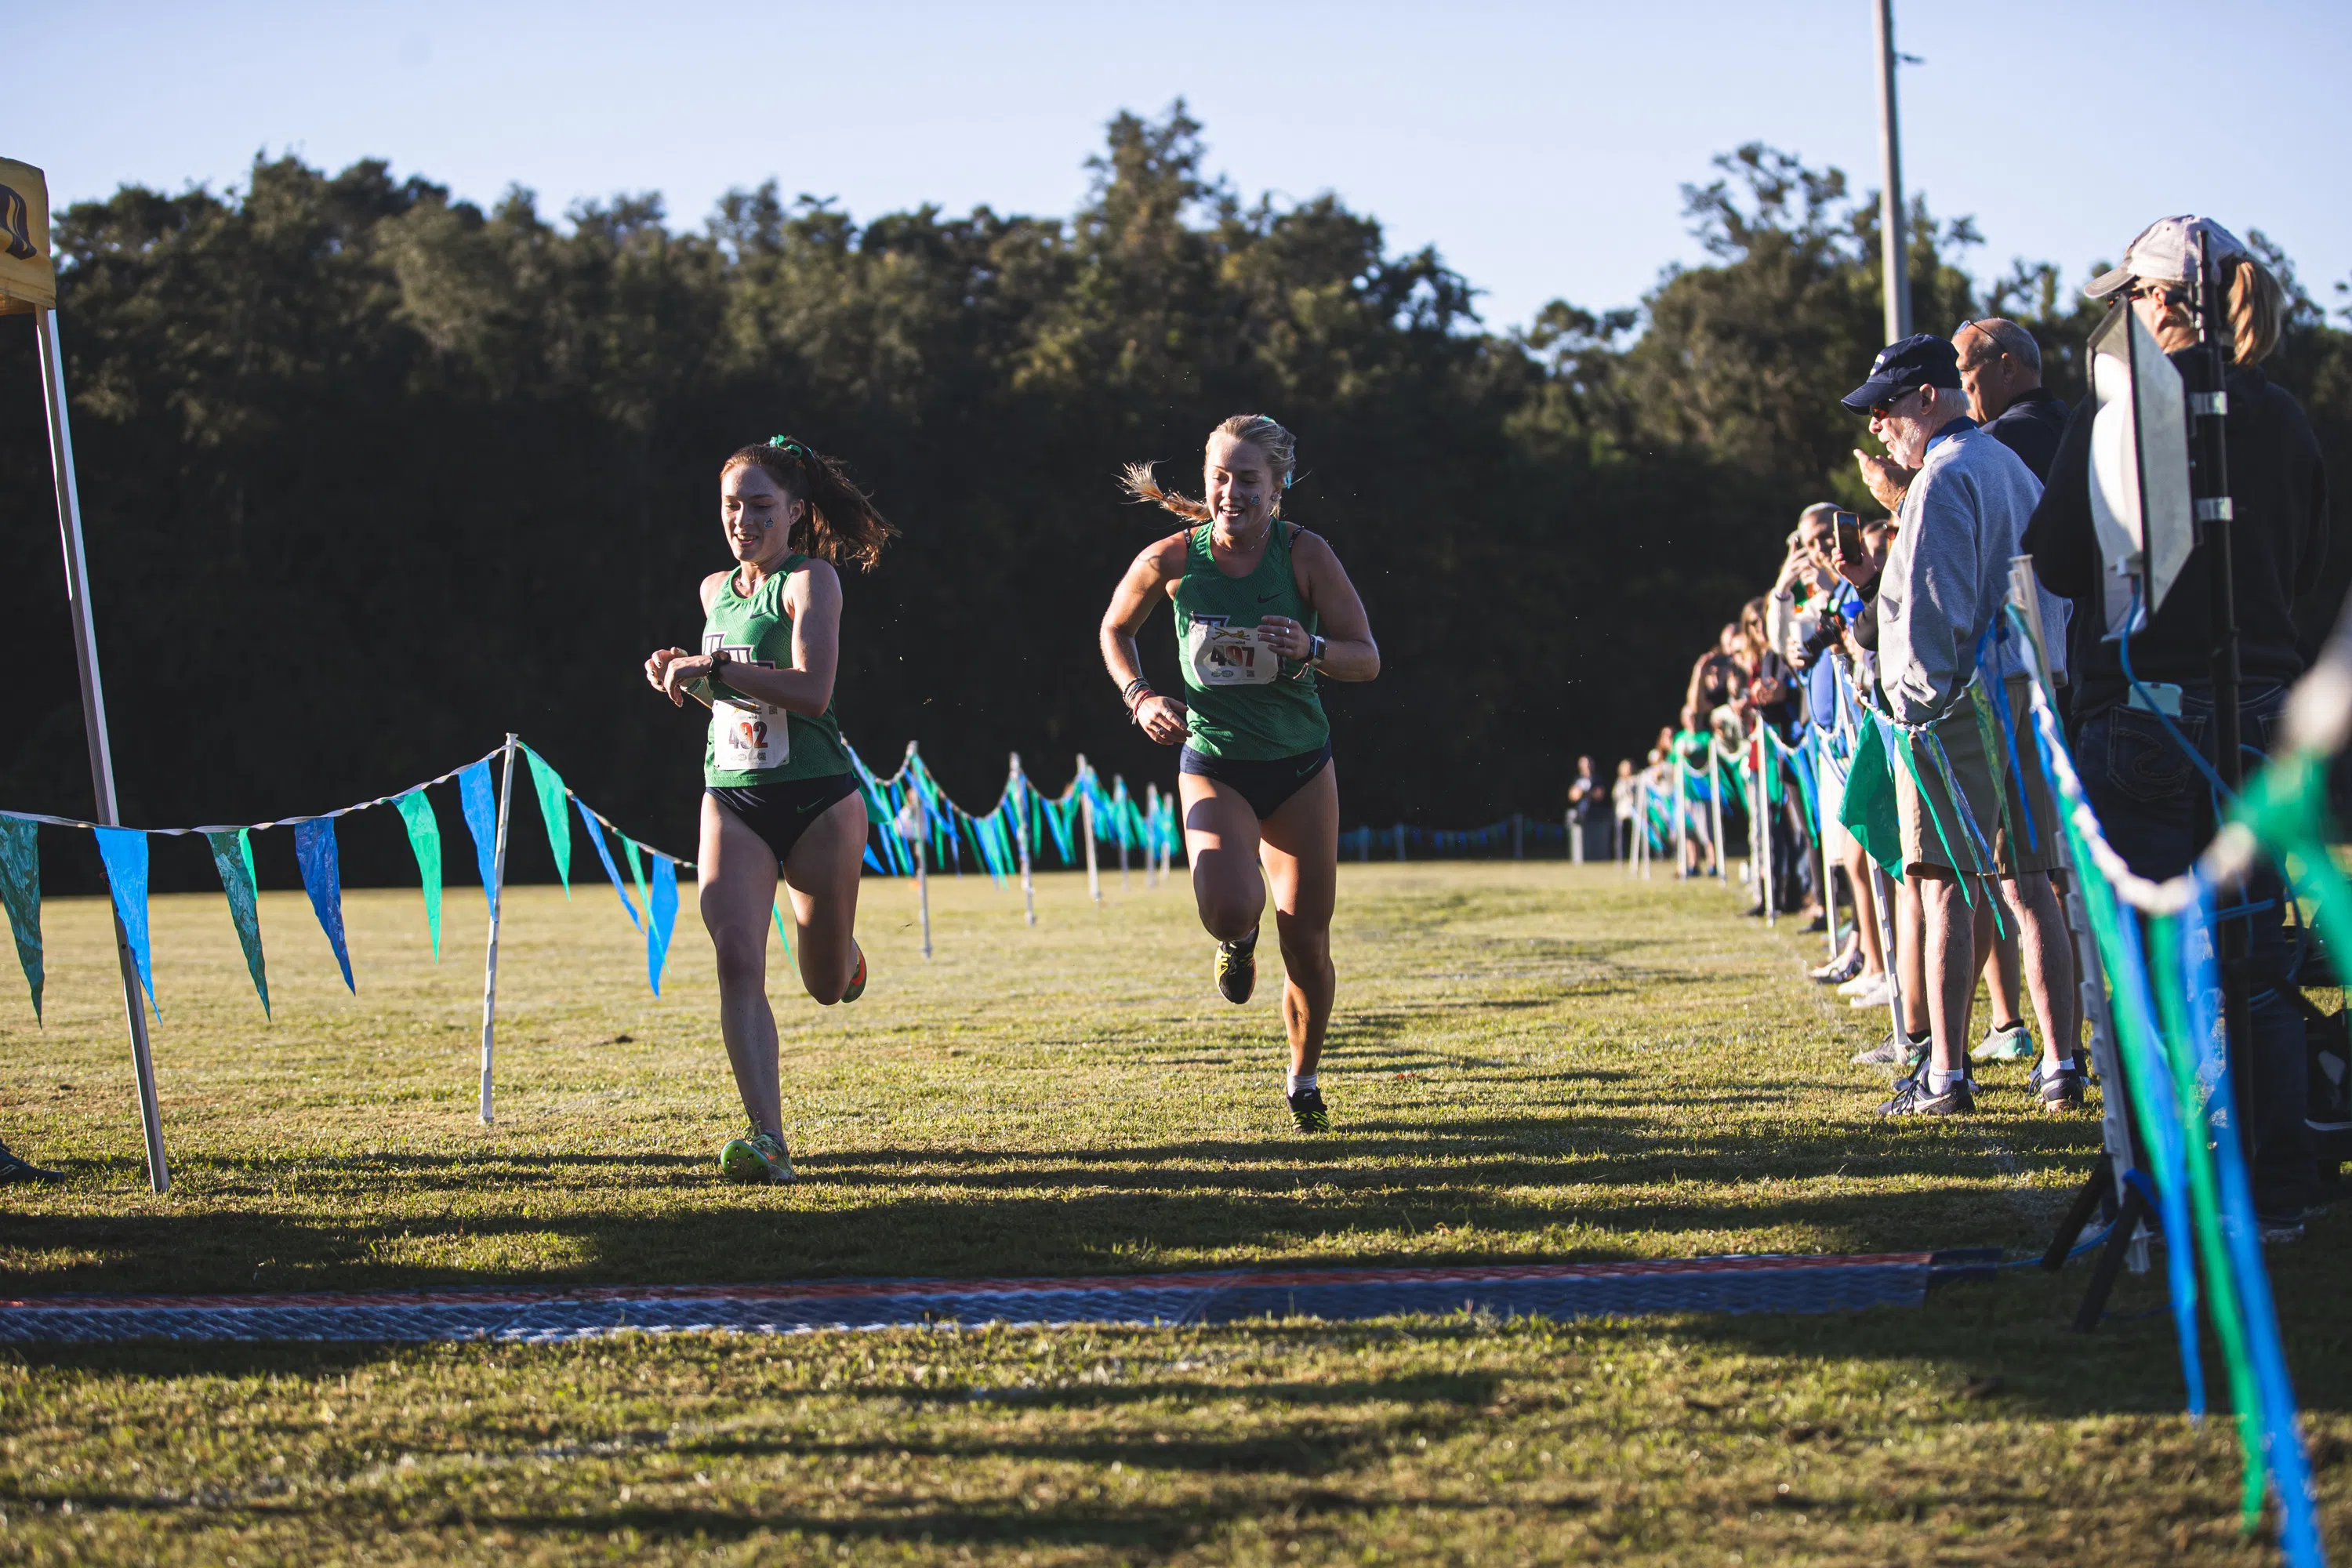 The UWF men's and women's cross country teams hosted the annual Argonaut Invitational 5K race. 